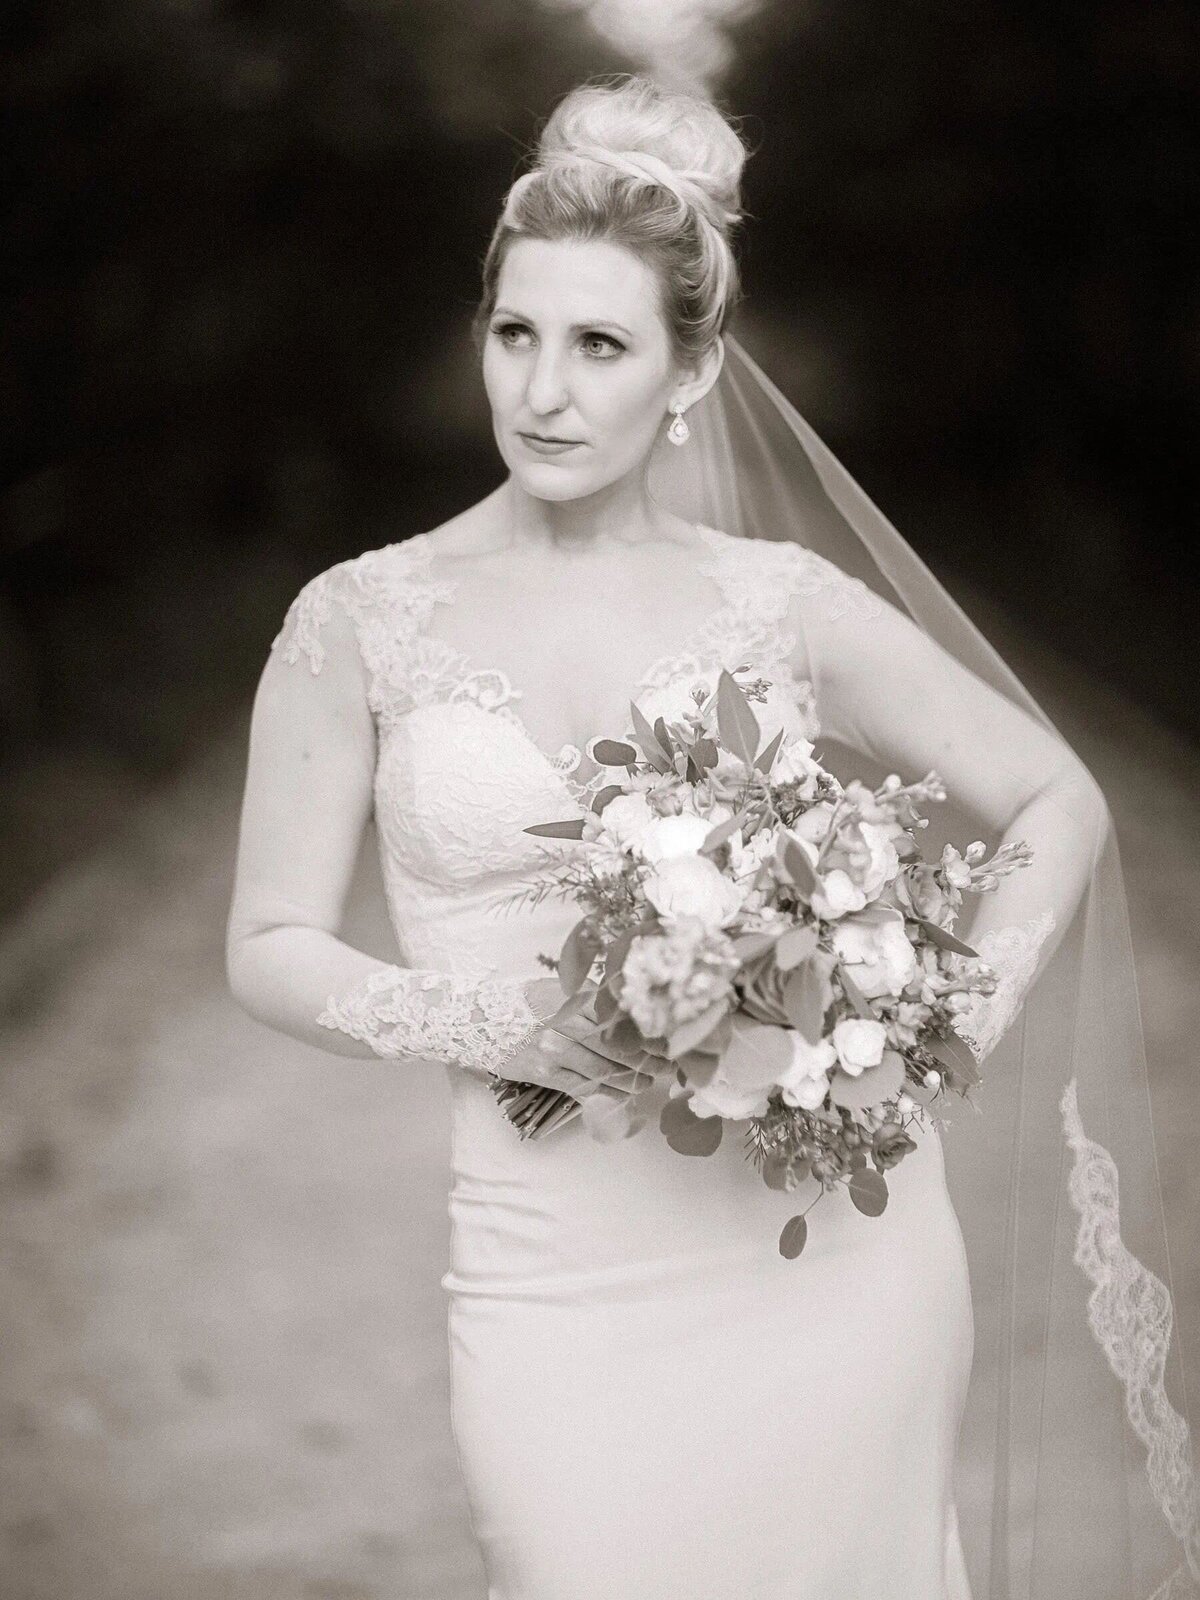 A bride looking off to the side while holding a bouquet of flowers